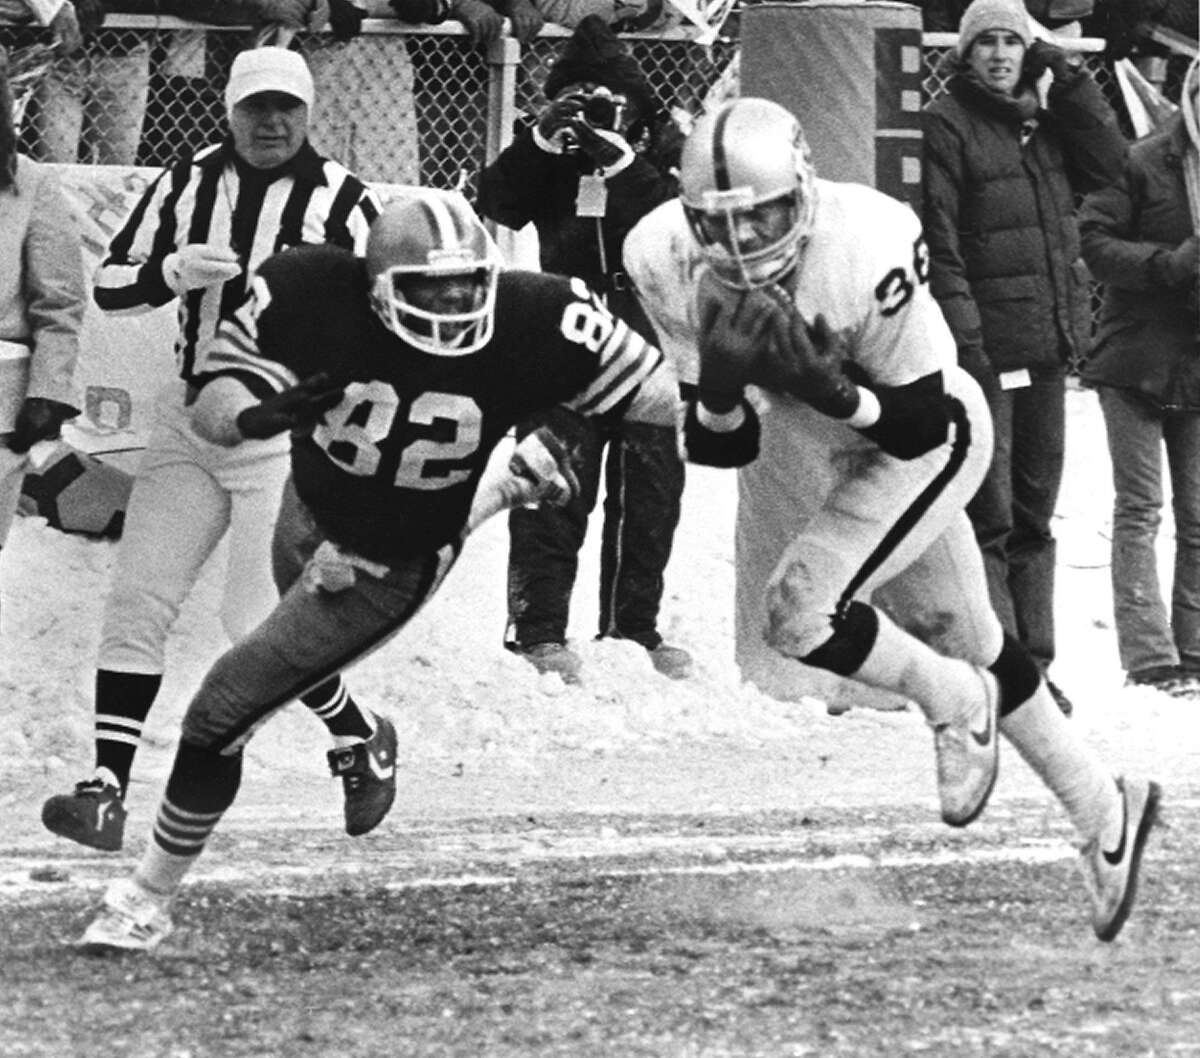 Oakland Raiders safety Mike Davis, right, intercepts a Brian Sipe pass intended for Browns tight end Ozzie Newsome, 82, in the end zone with 49 seconds left in AFC playoff game Sunday, Jan. 5, 1981 in Cleveland. The interception sealed a 14-12 win for the Raiders who advance to the AFC championship against San Diego. (AP Photo)